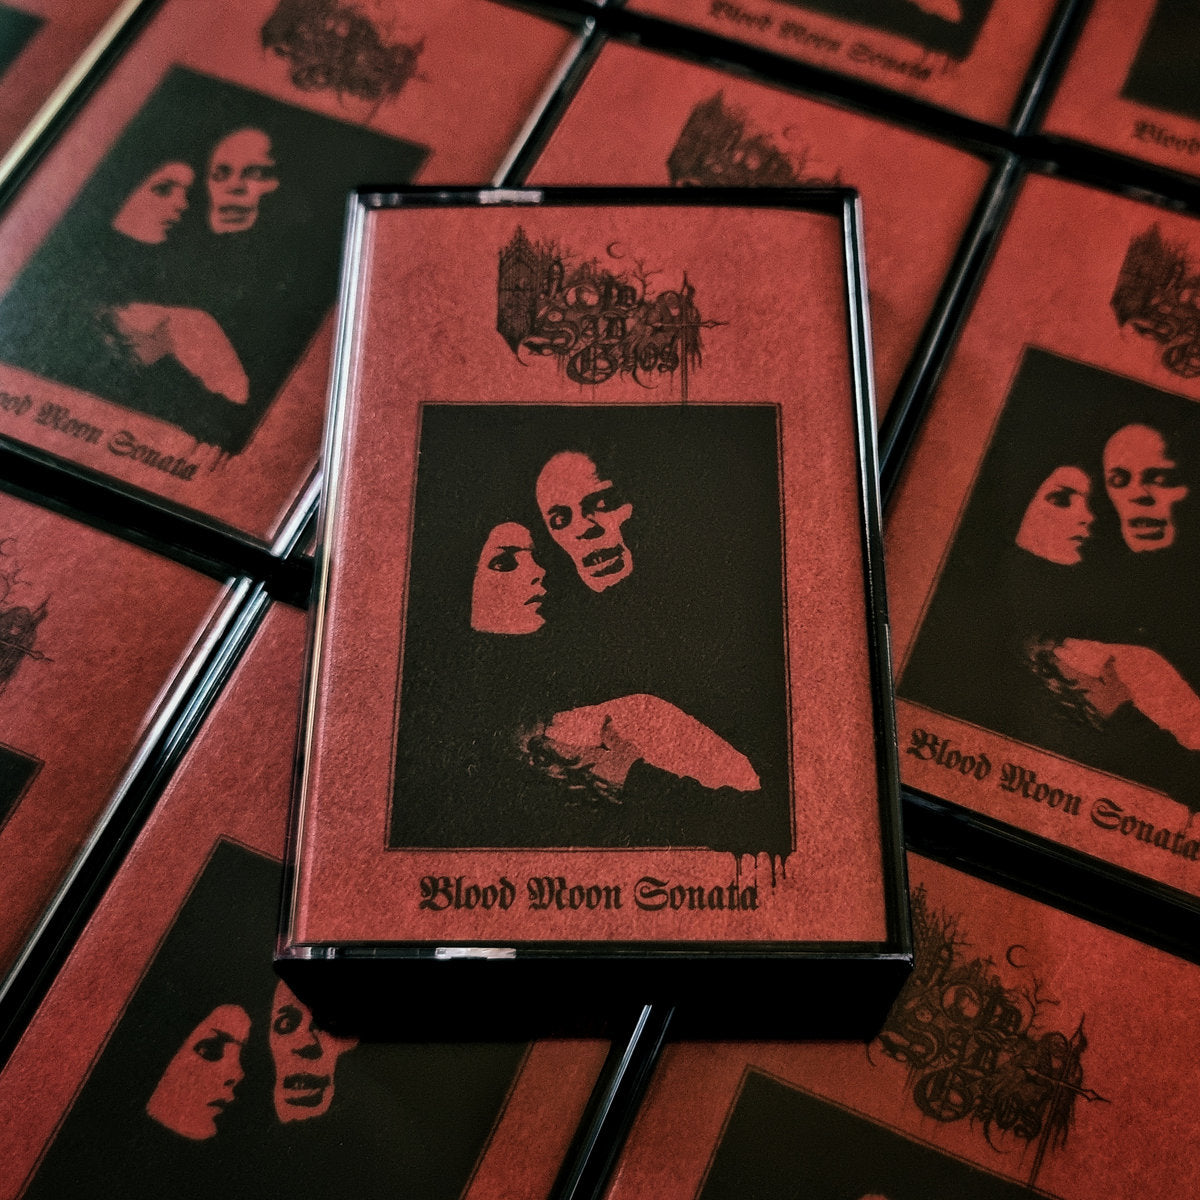 [SOLD OUT] AN OLD SAD GHOST "Blood Moon Sonata" Cassette Tape (lim.150)